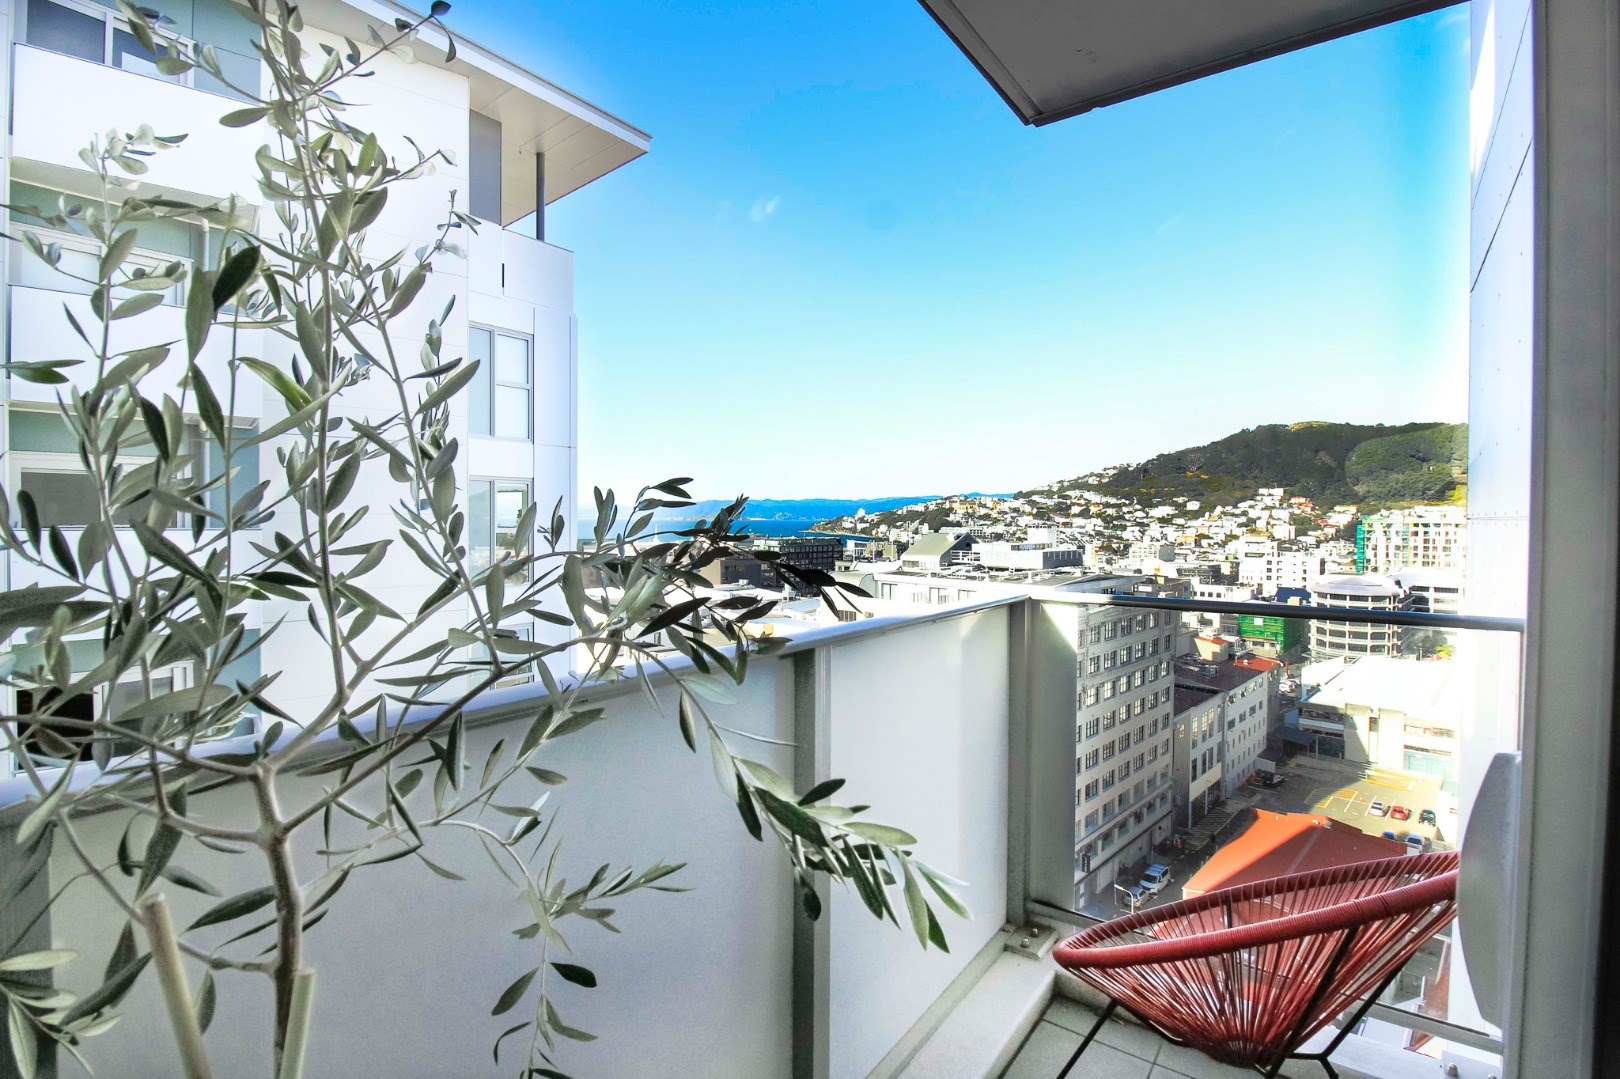 Real Estate For Rent Houses & Apartments : 1 bedroom fully furnished Soho apartment, Wellington